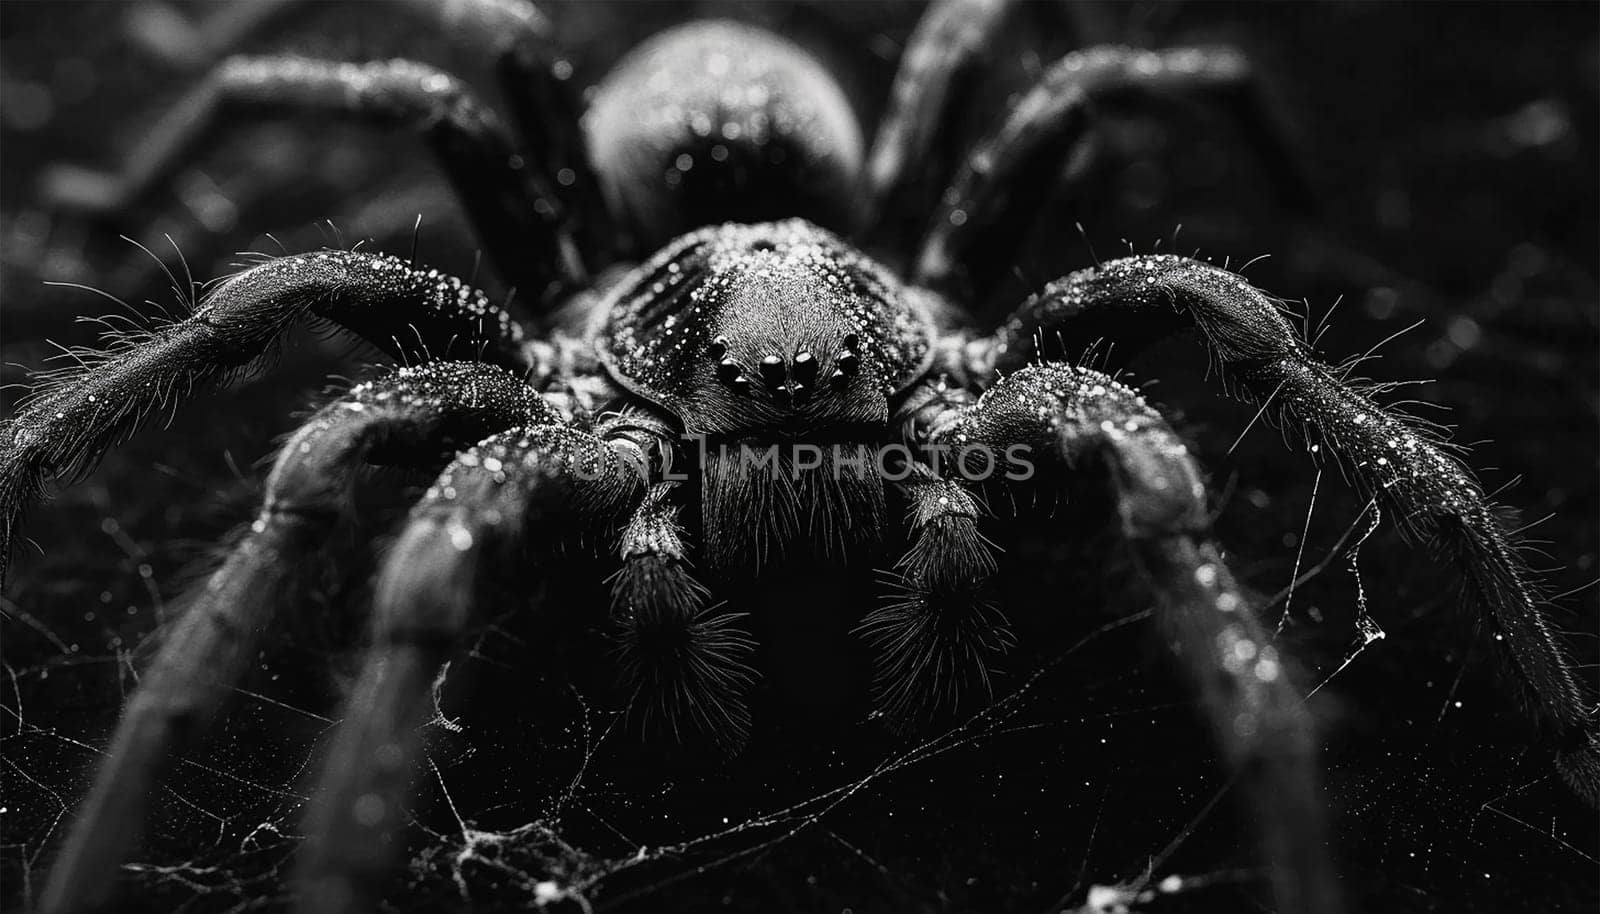 Scary close up of a spider on black background. Close up spider's web on retro vintage black color background for halloween night party design concept concept. Scary horror design by Annebel146